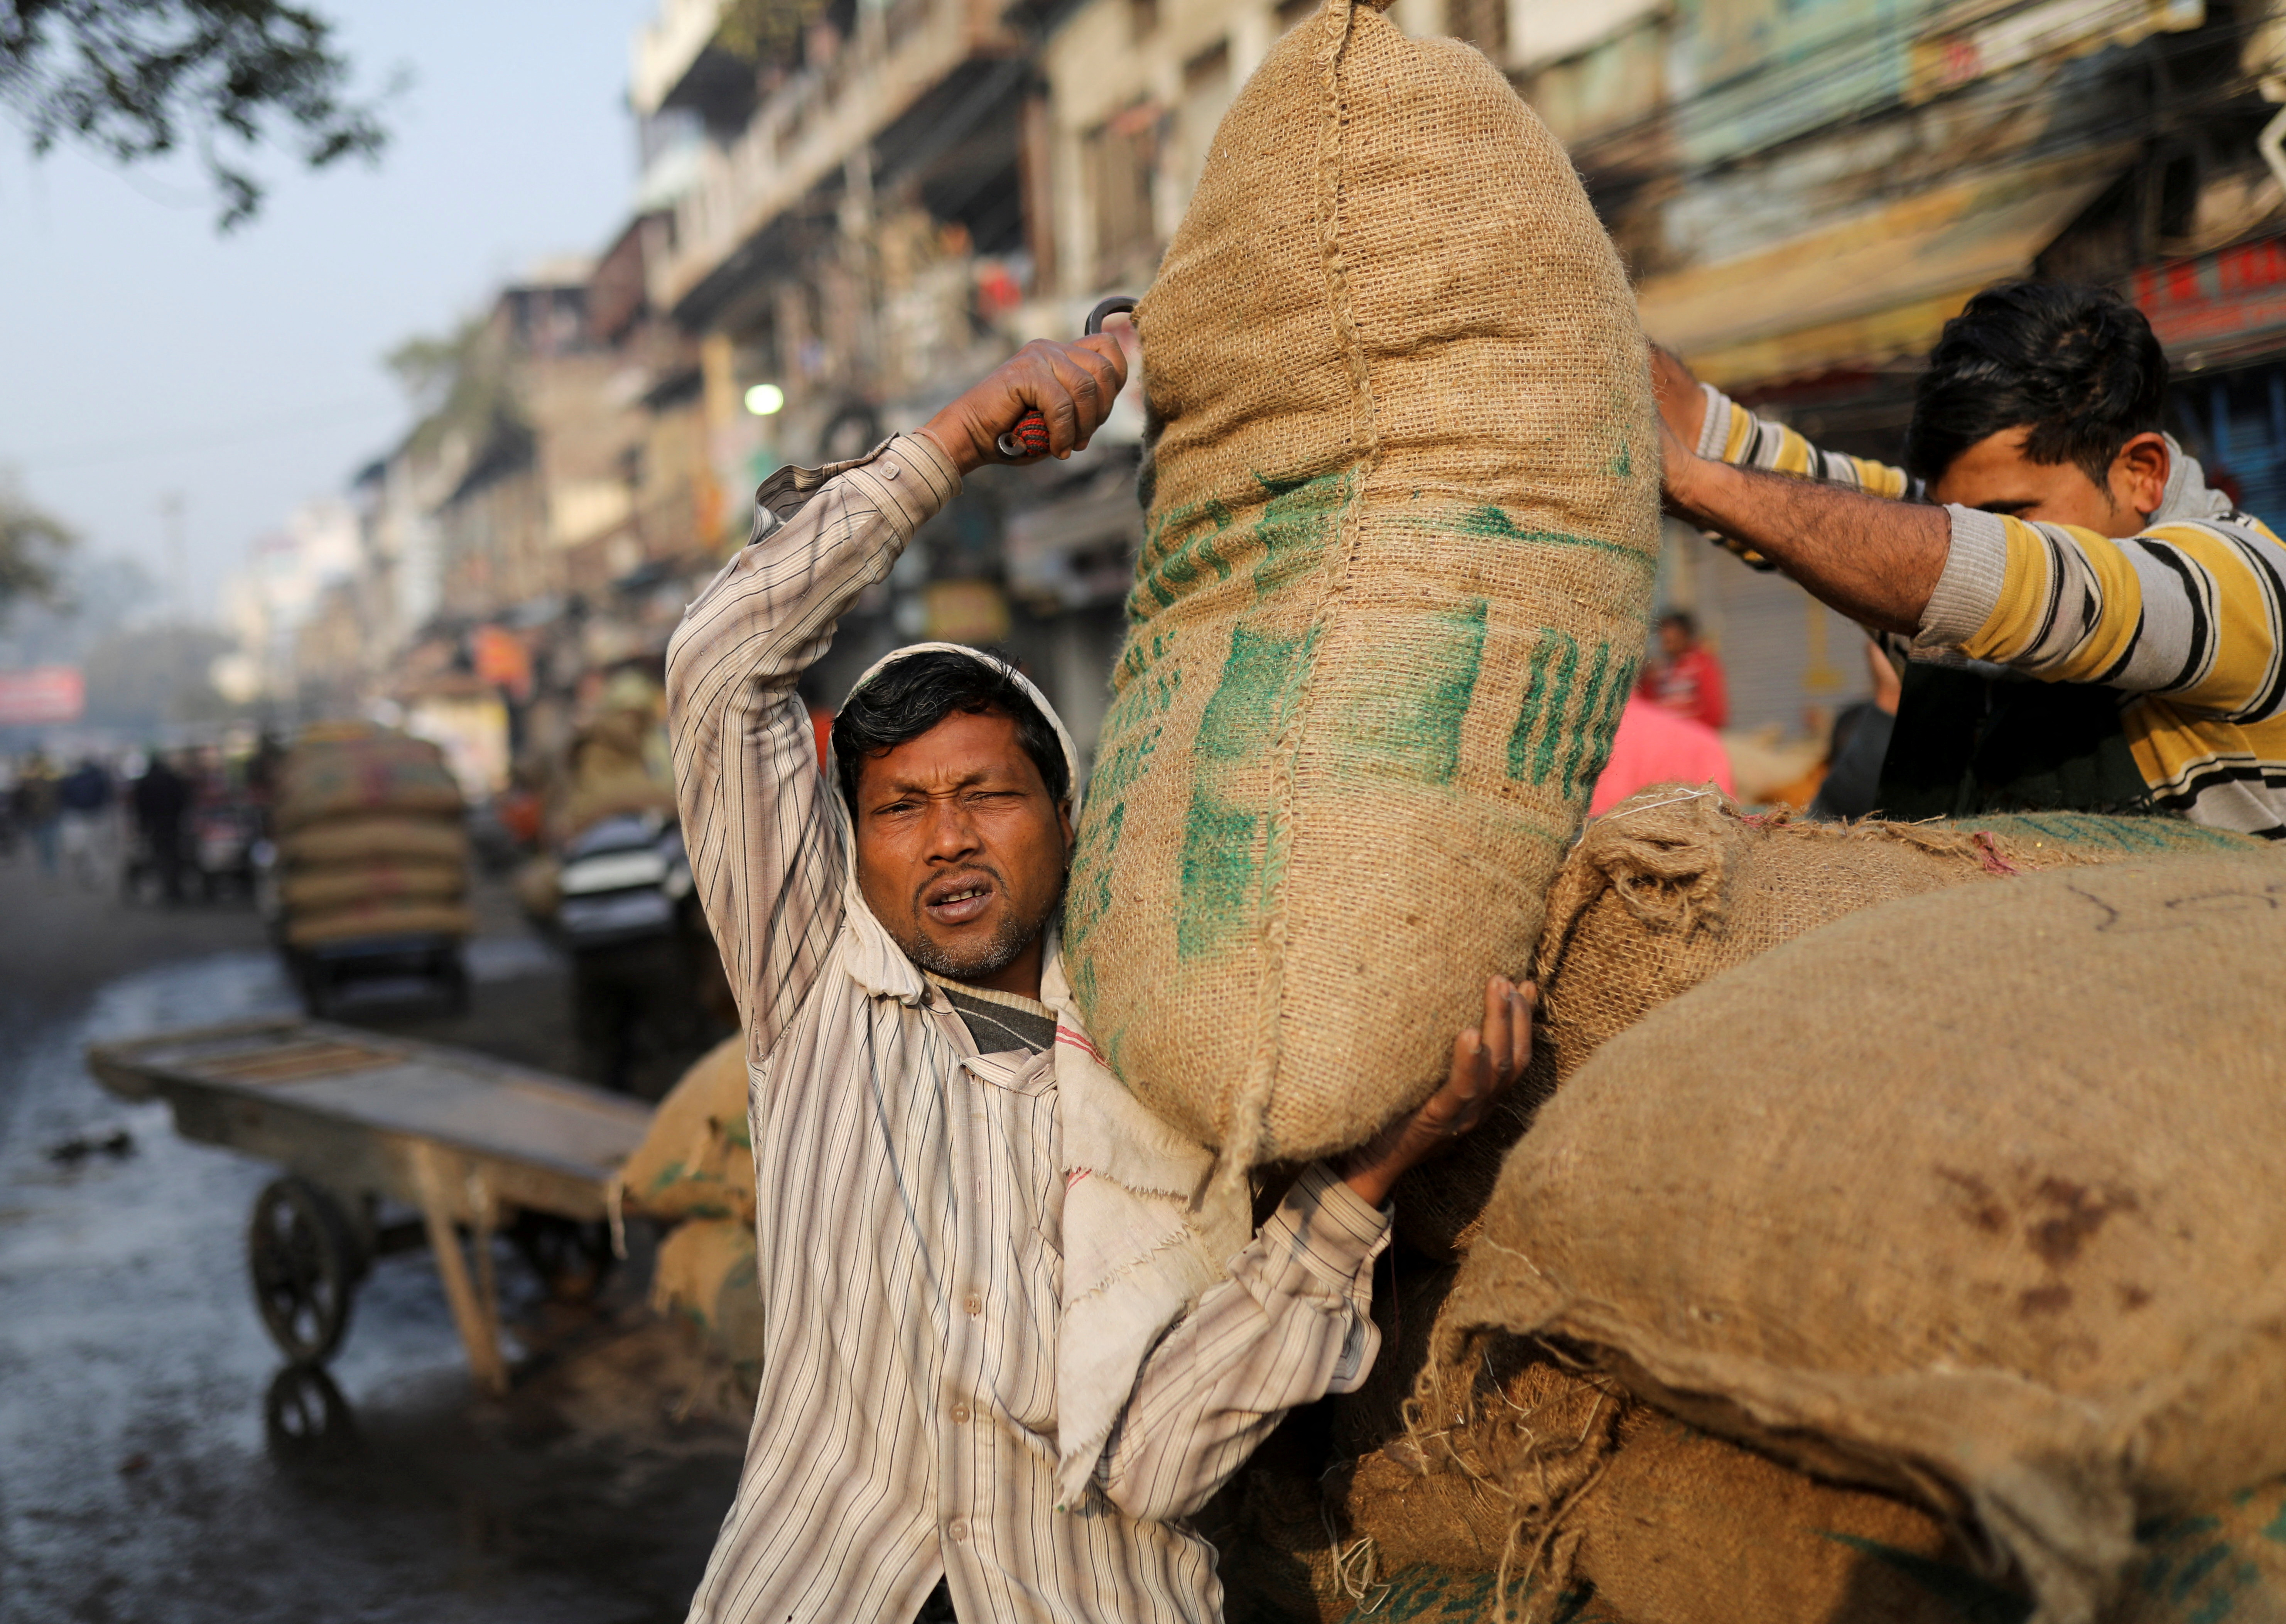 A labourer reacts as he carries a sack at a wholesale market in the old quarters of Delhi